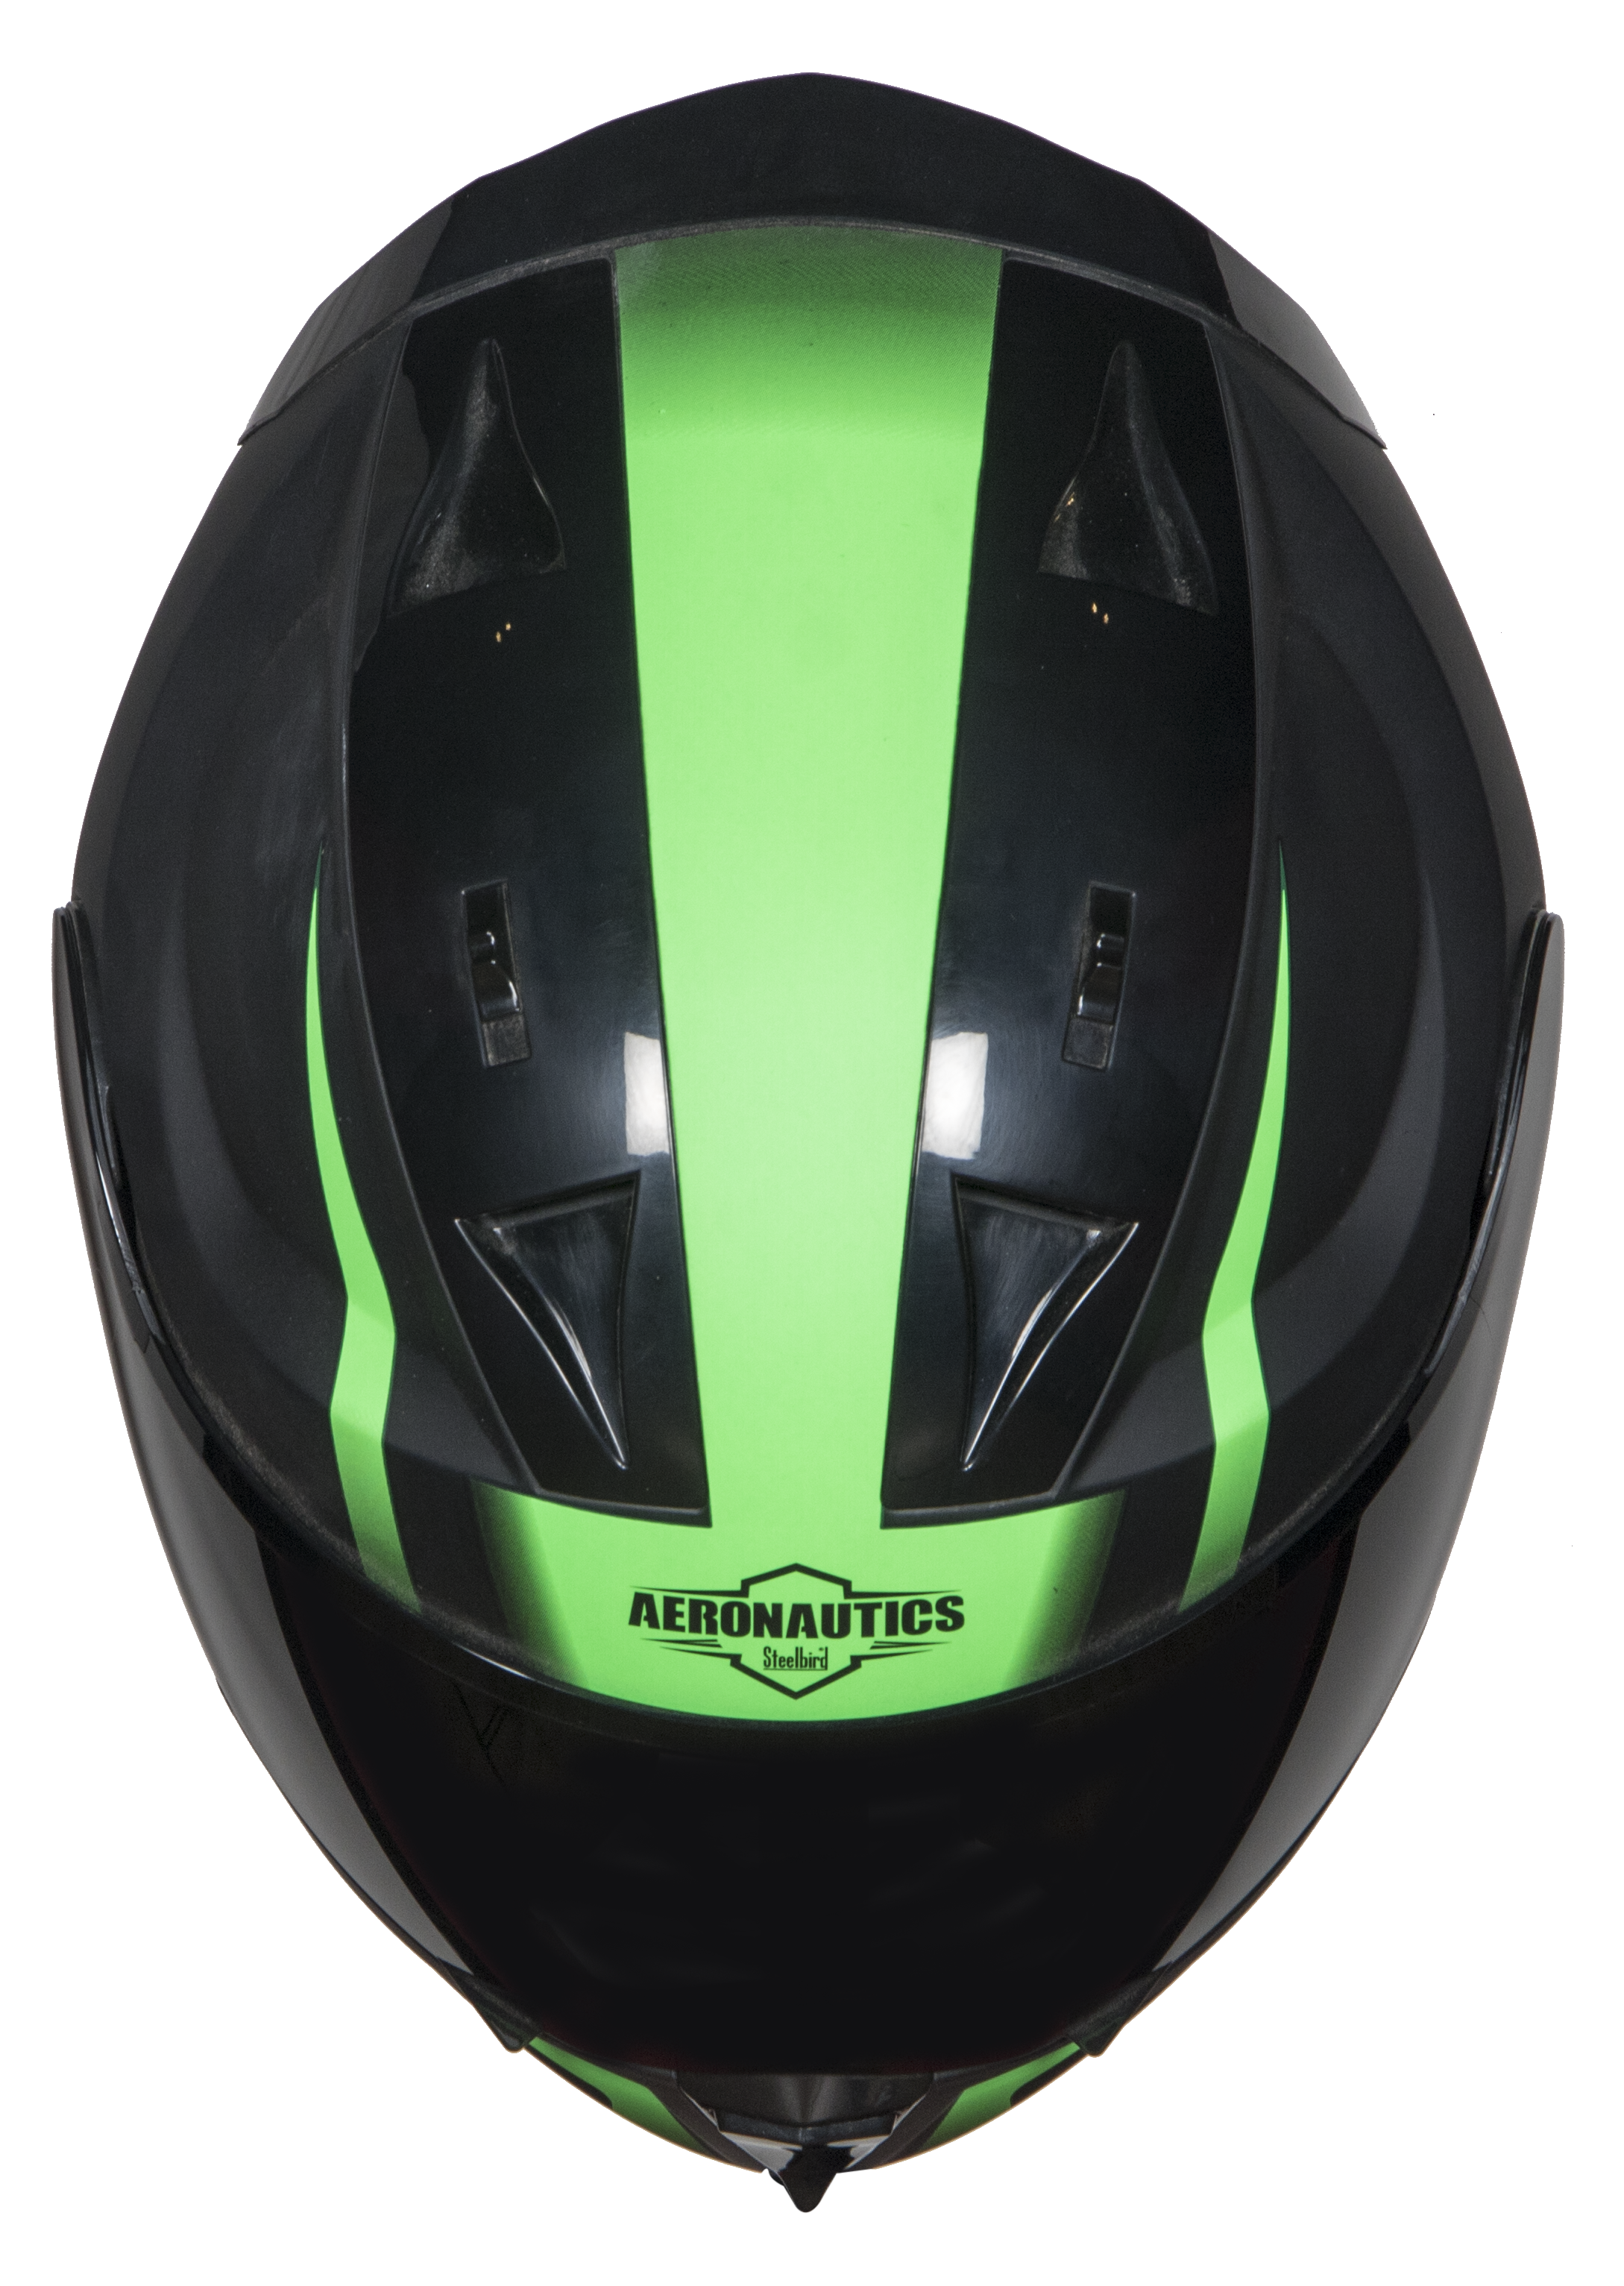 SA-1 WHIF Mat Black With Green (Fitted With Clear Visor Extra Chrome Silver Visor Free)